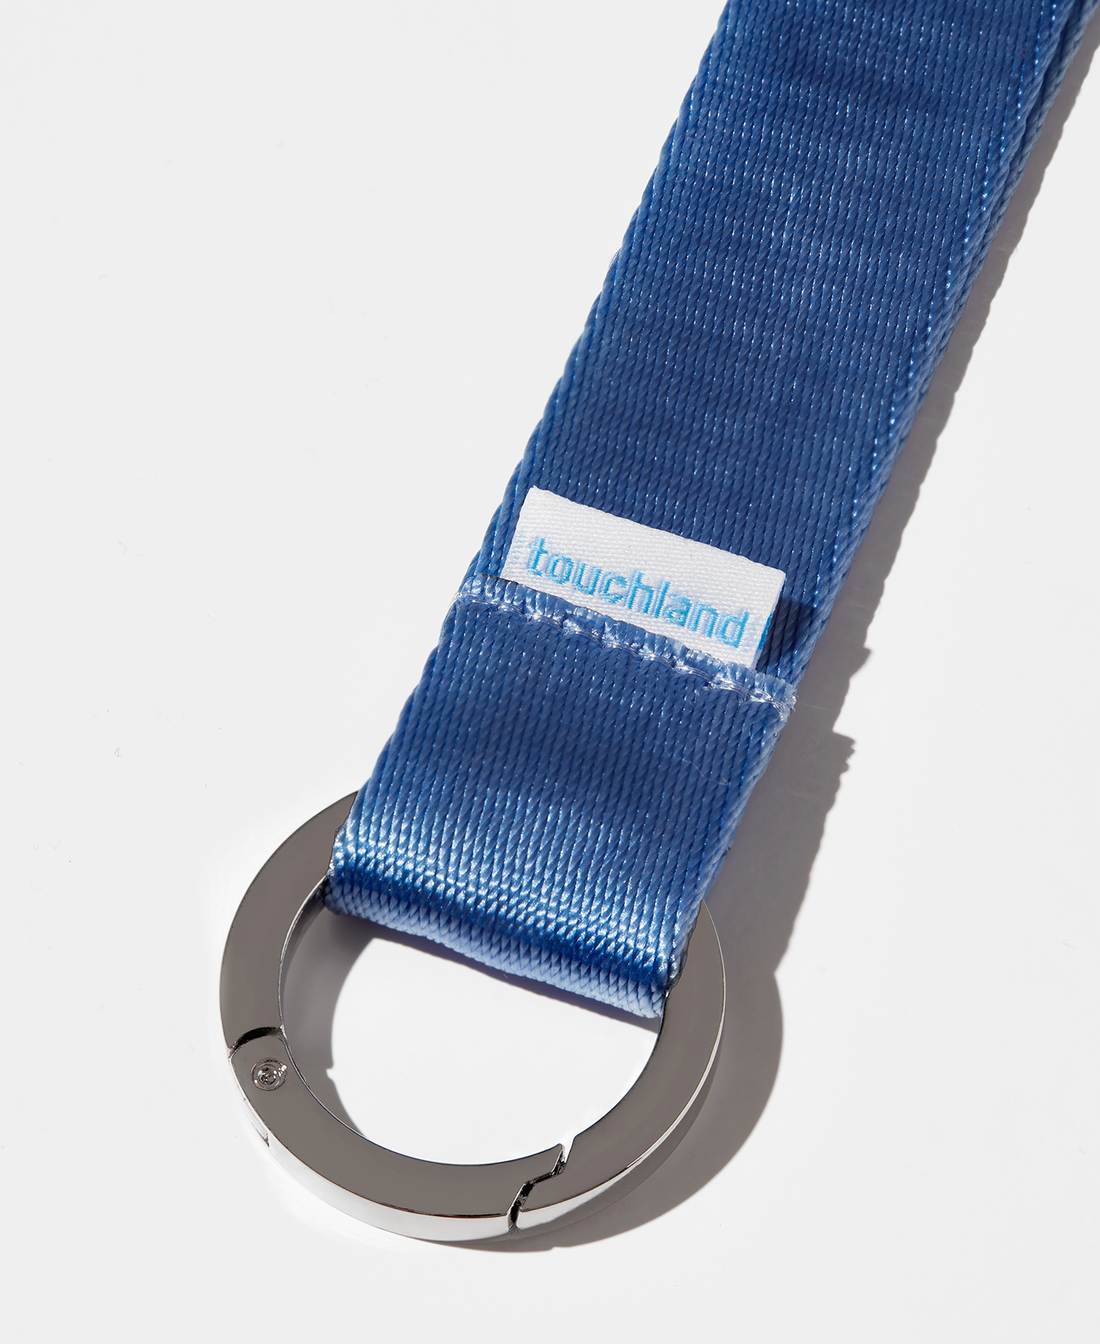 Blue lanyard zoomed in on silver ring on white background